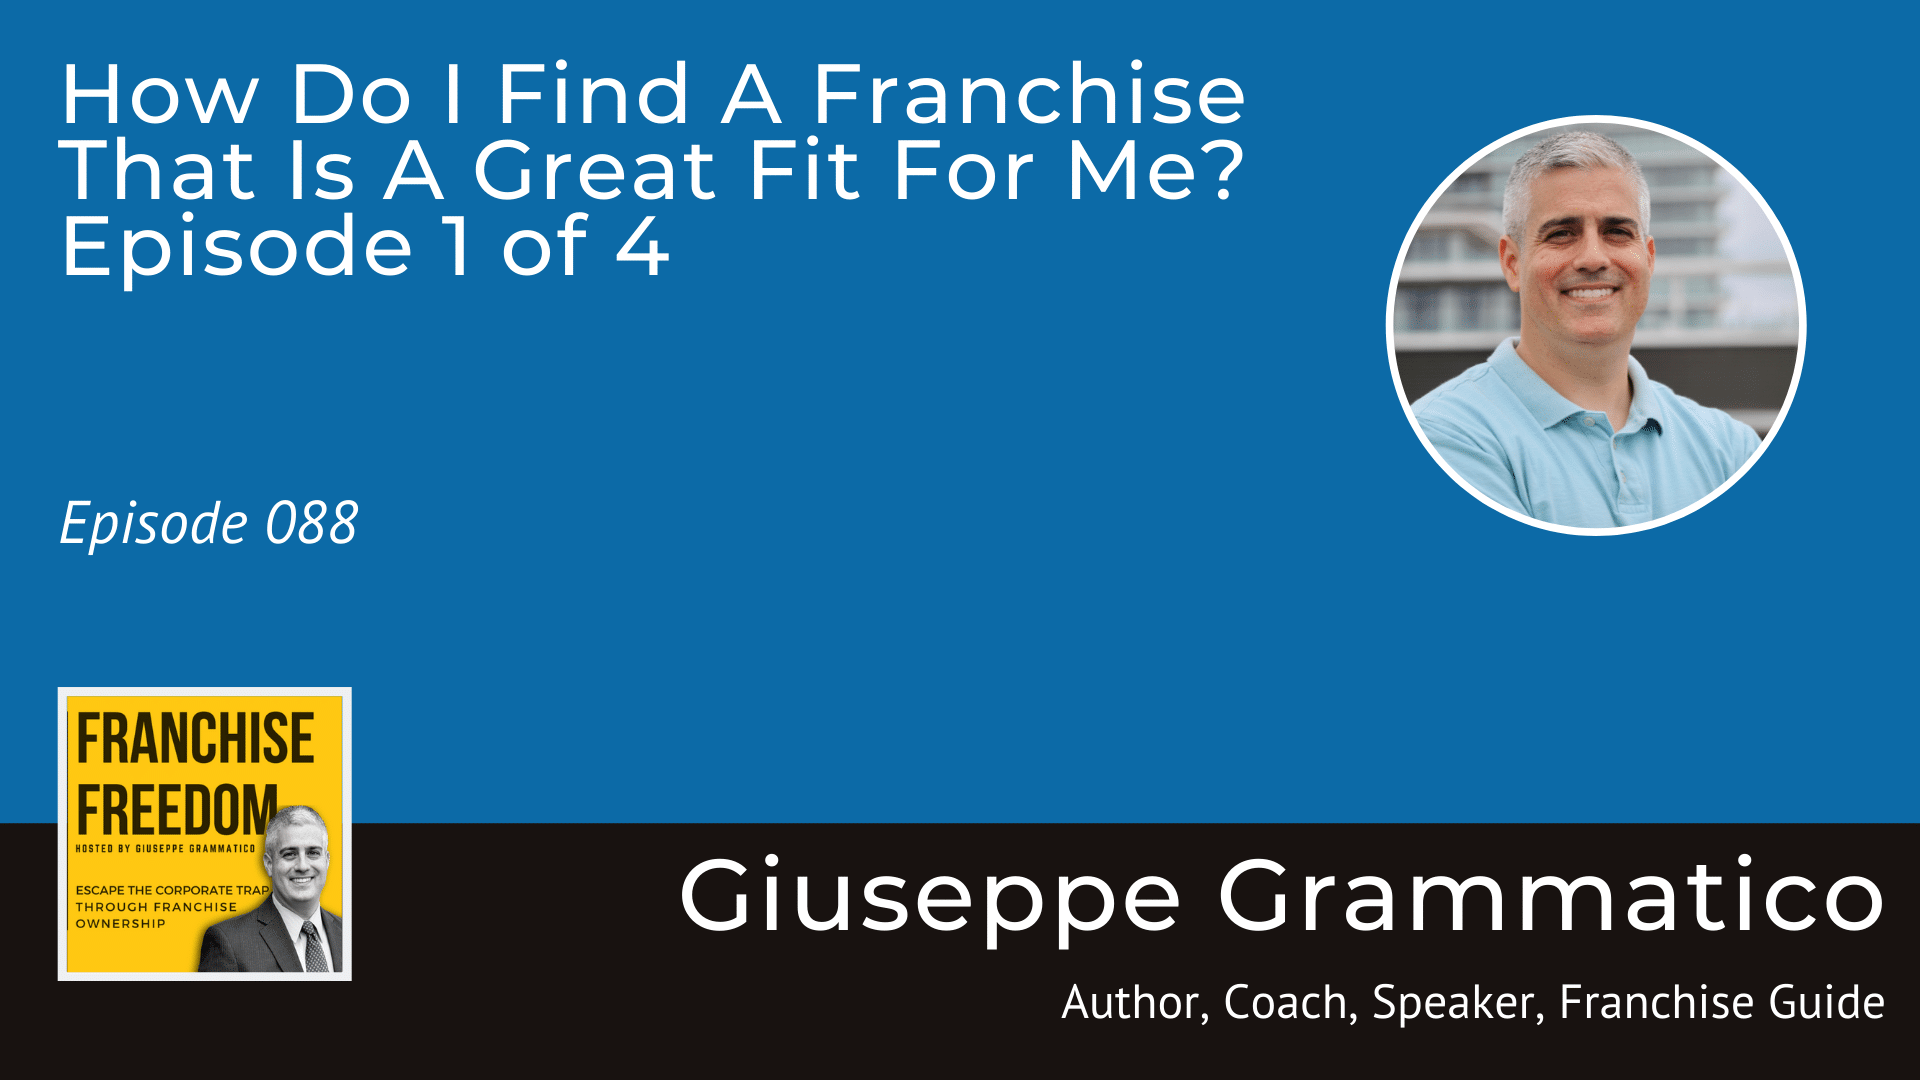 How Do I Find A Franchise That Is A Great Fit For Me? Episode 1 of 4